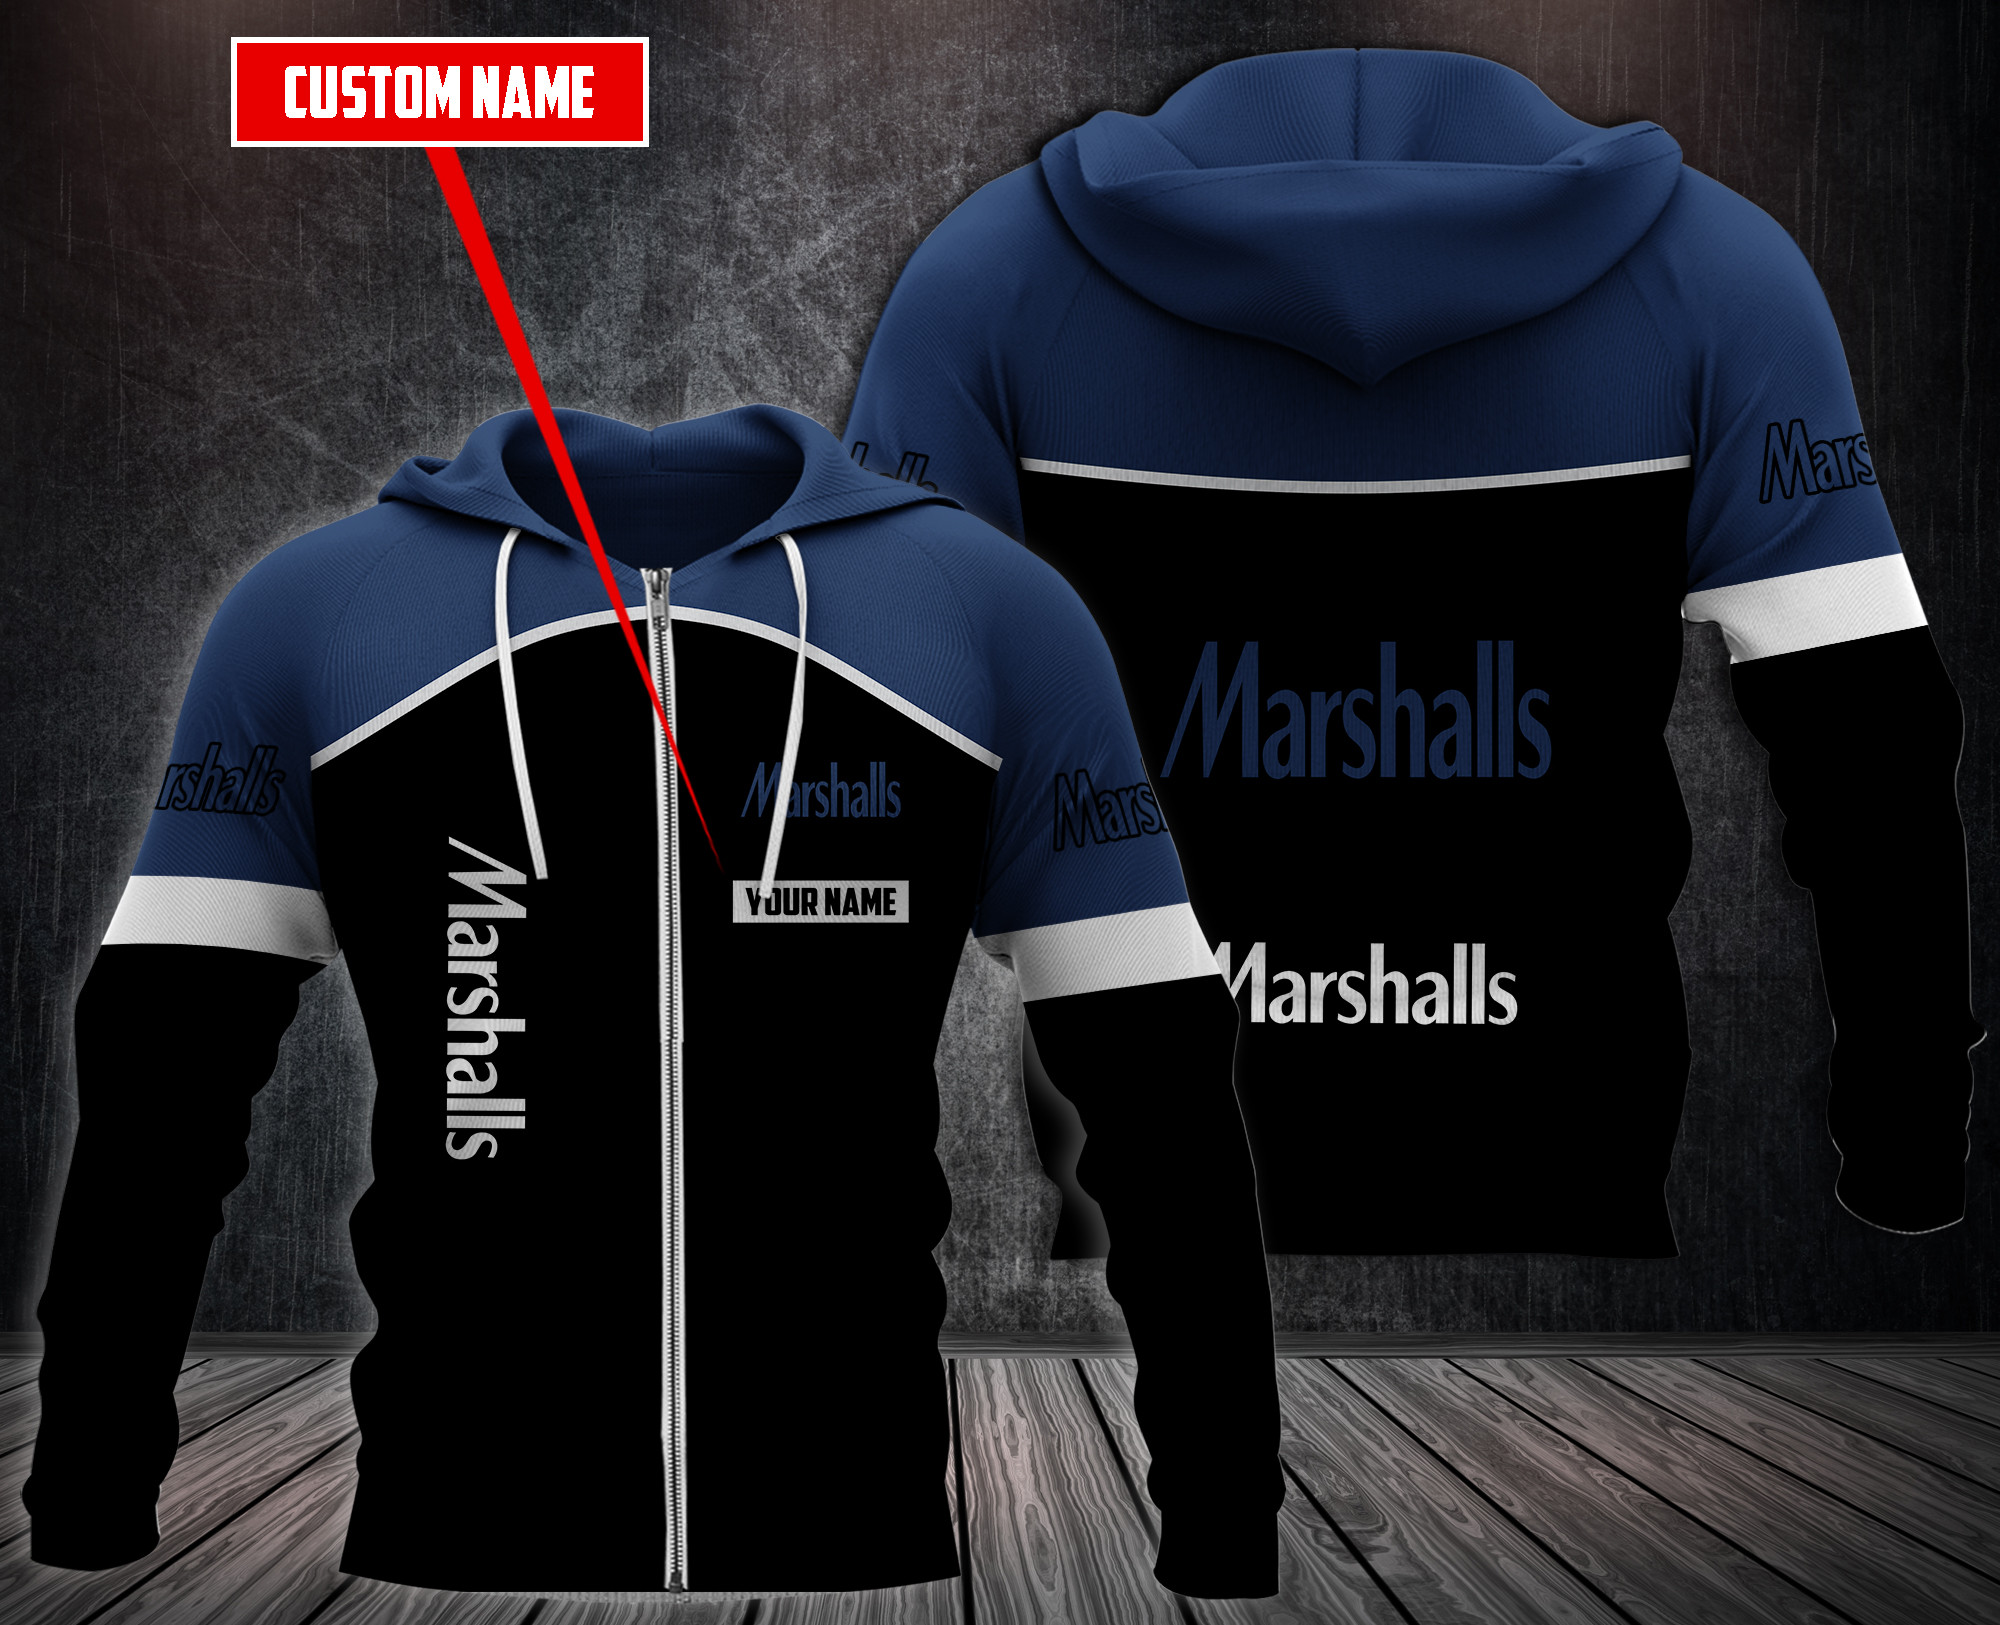 Choose the right hoodies for you on our boxboxshirt and ethershirt websites in 2022 75